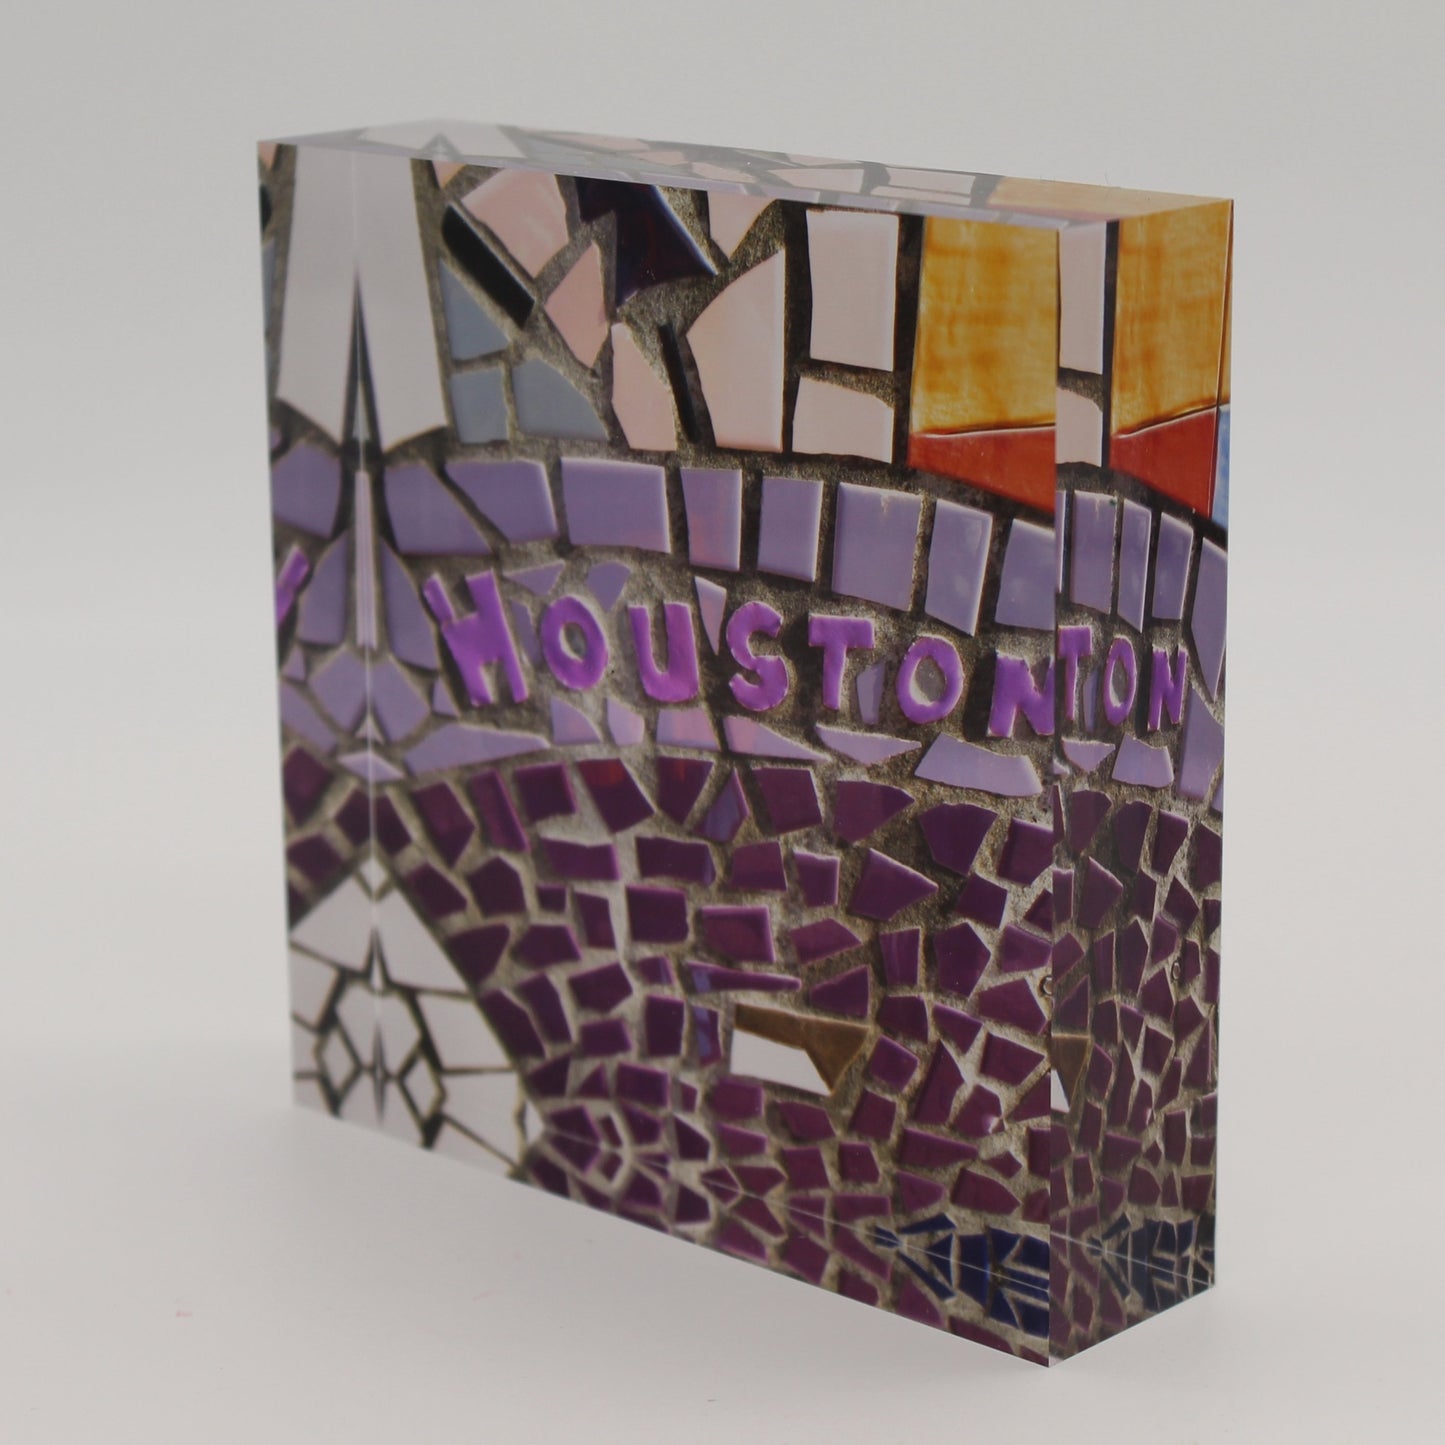 Tilted view of Acrylic block picture of mosaic tiles spelling Houston